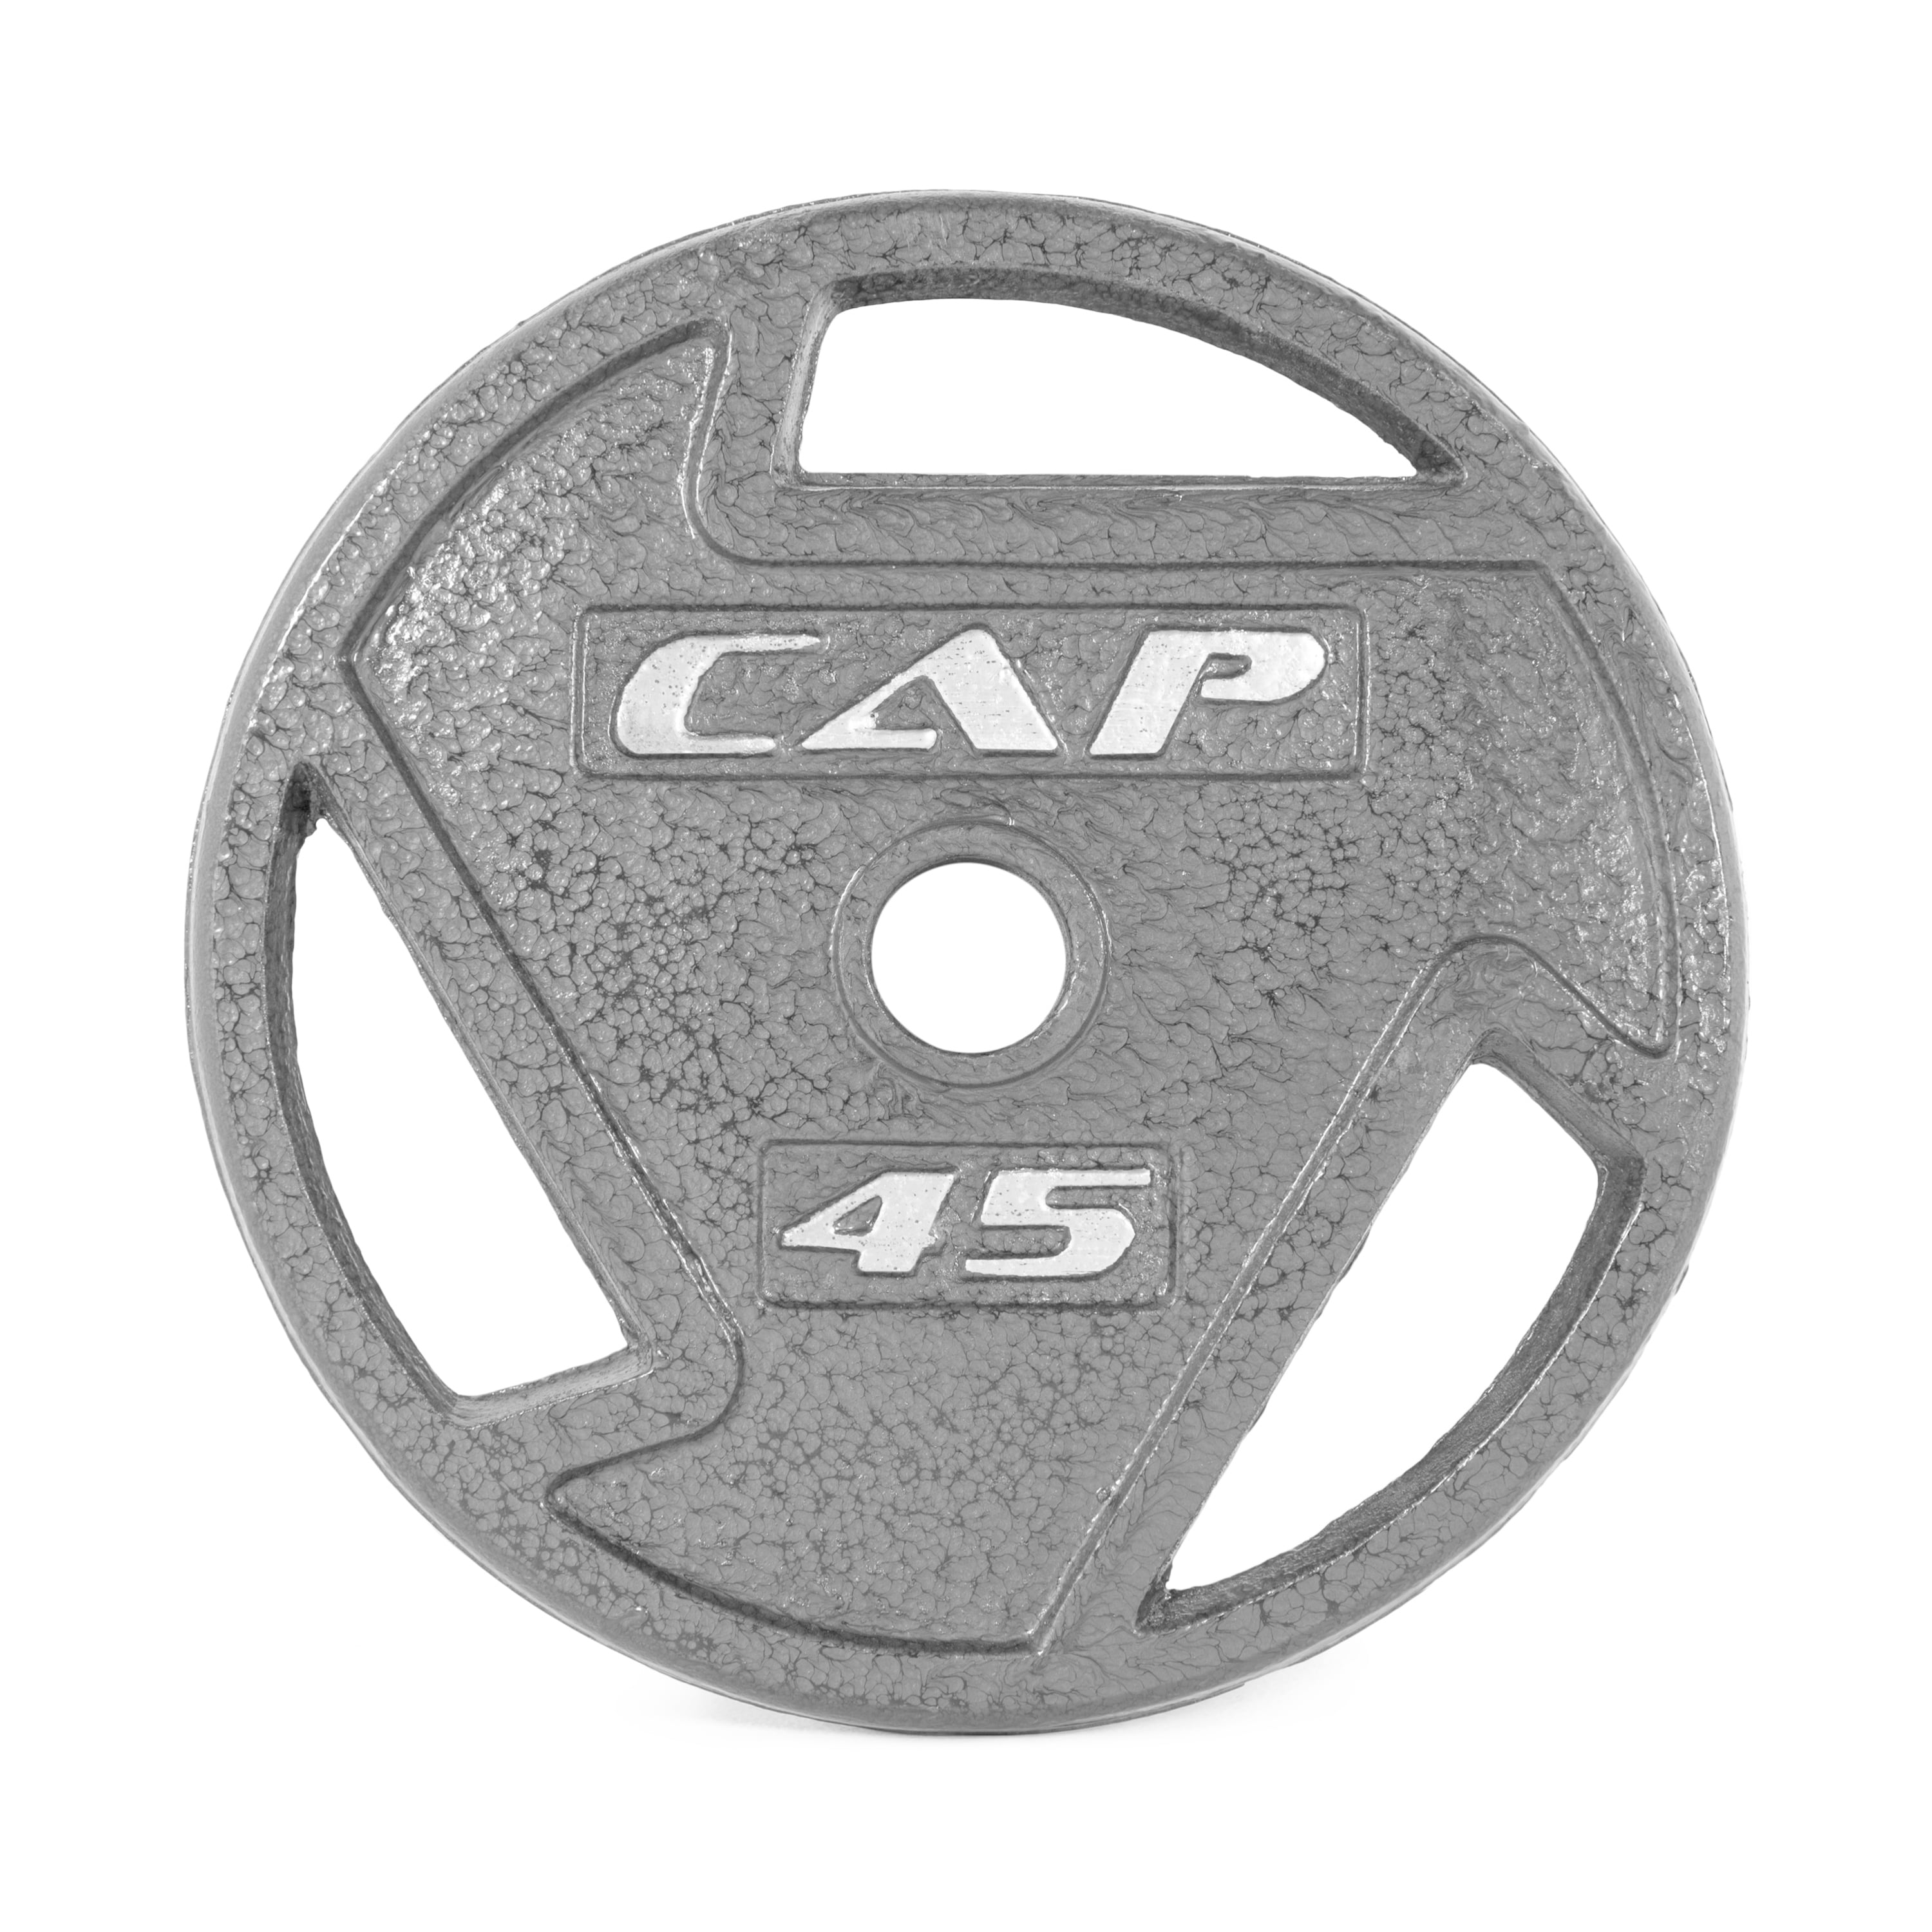 NEW Cap Barbell Standard 1 inch Grip Weights 2 25 lbs Pound Plates FREE SHIPPING 